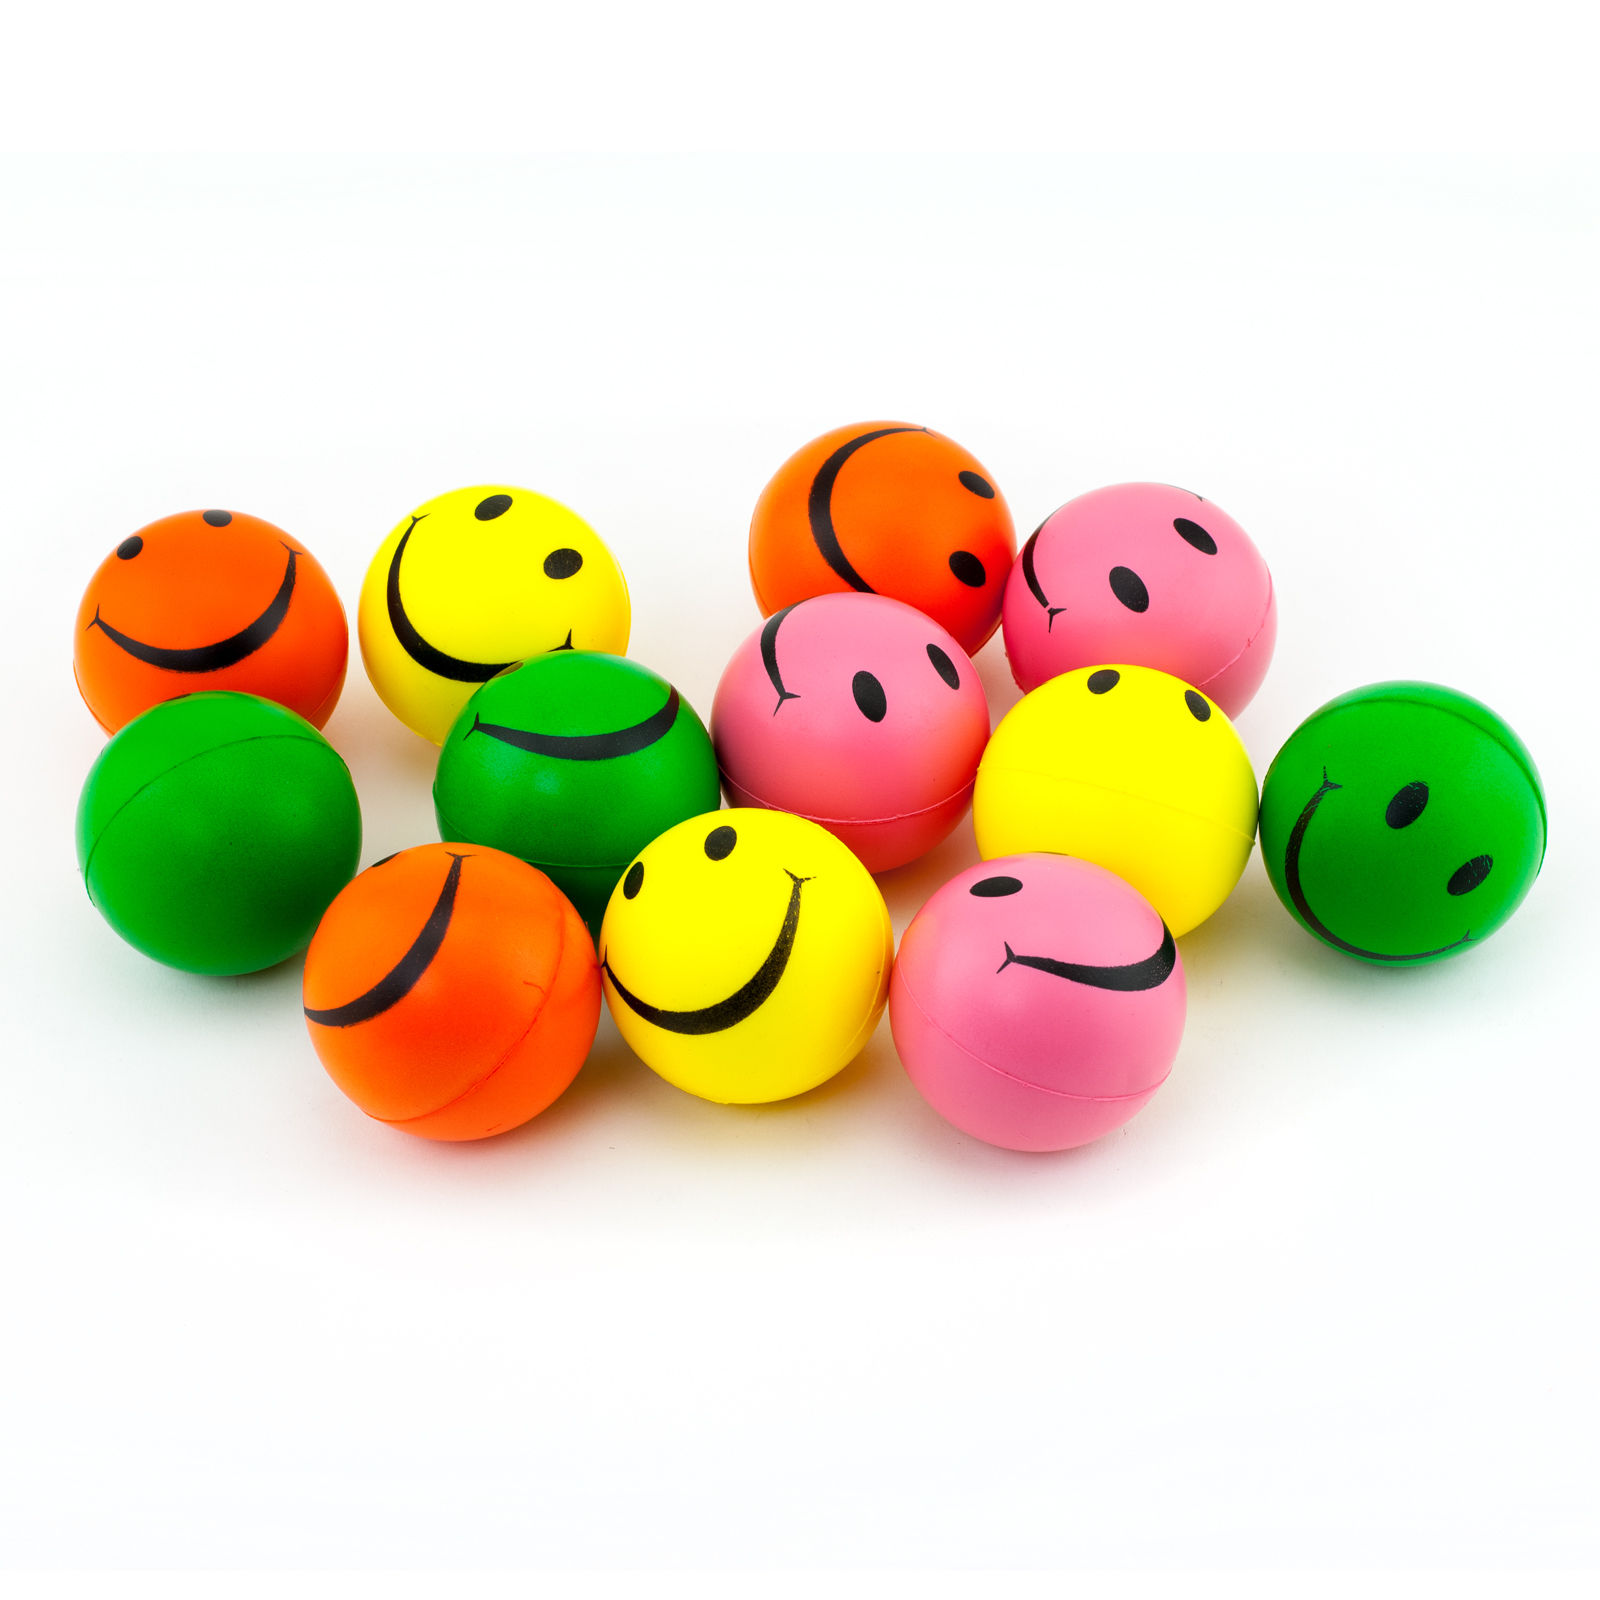 Happy balls. Green Squishy Ball with smiling face. Balls for face.